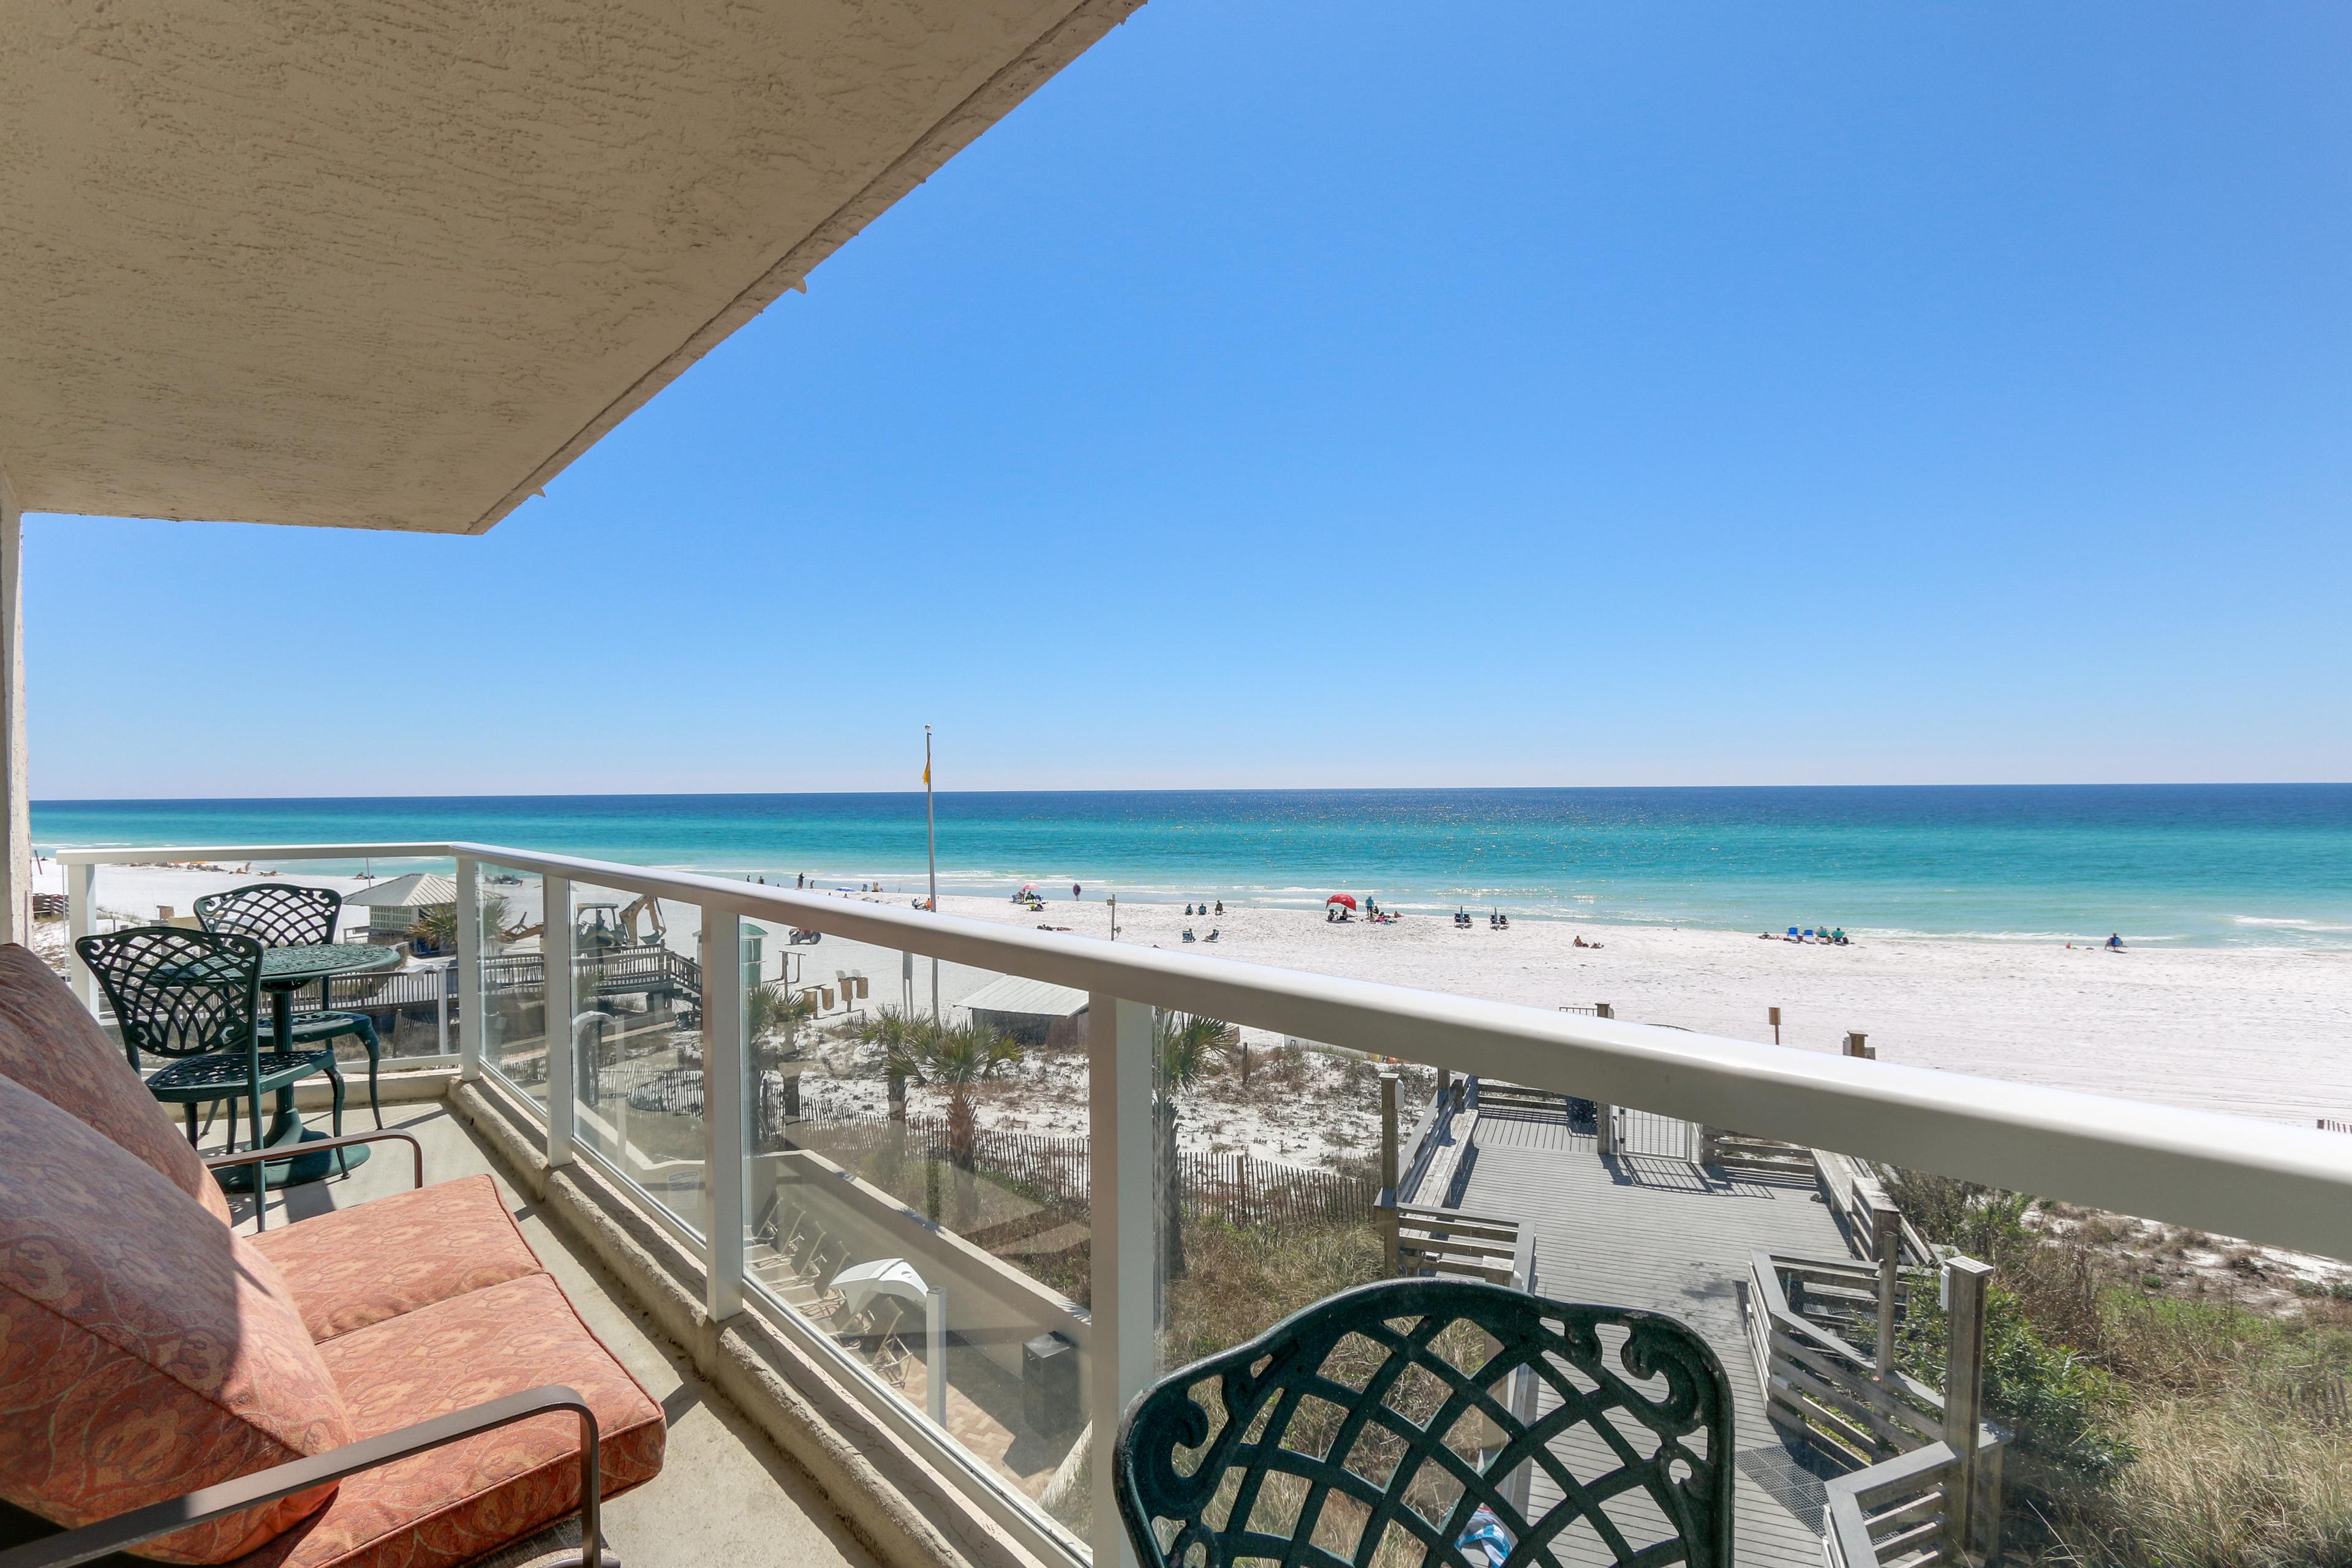 With a direct South Gulf view, you won't miss anything on this balcony!